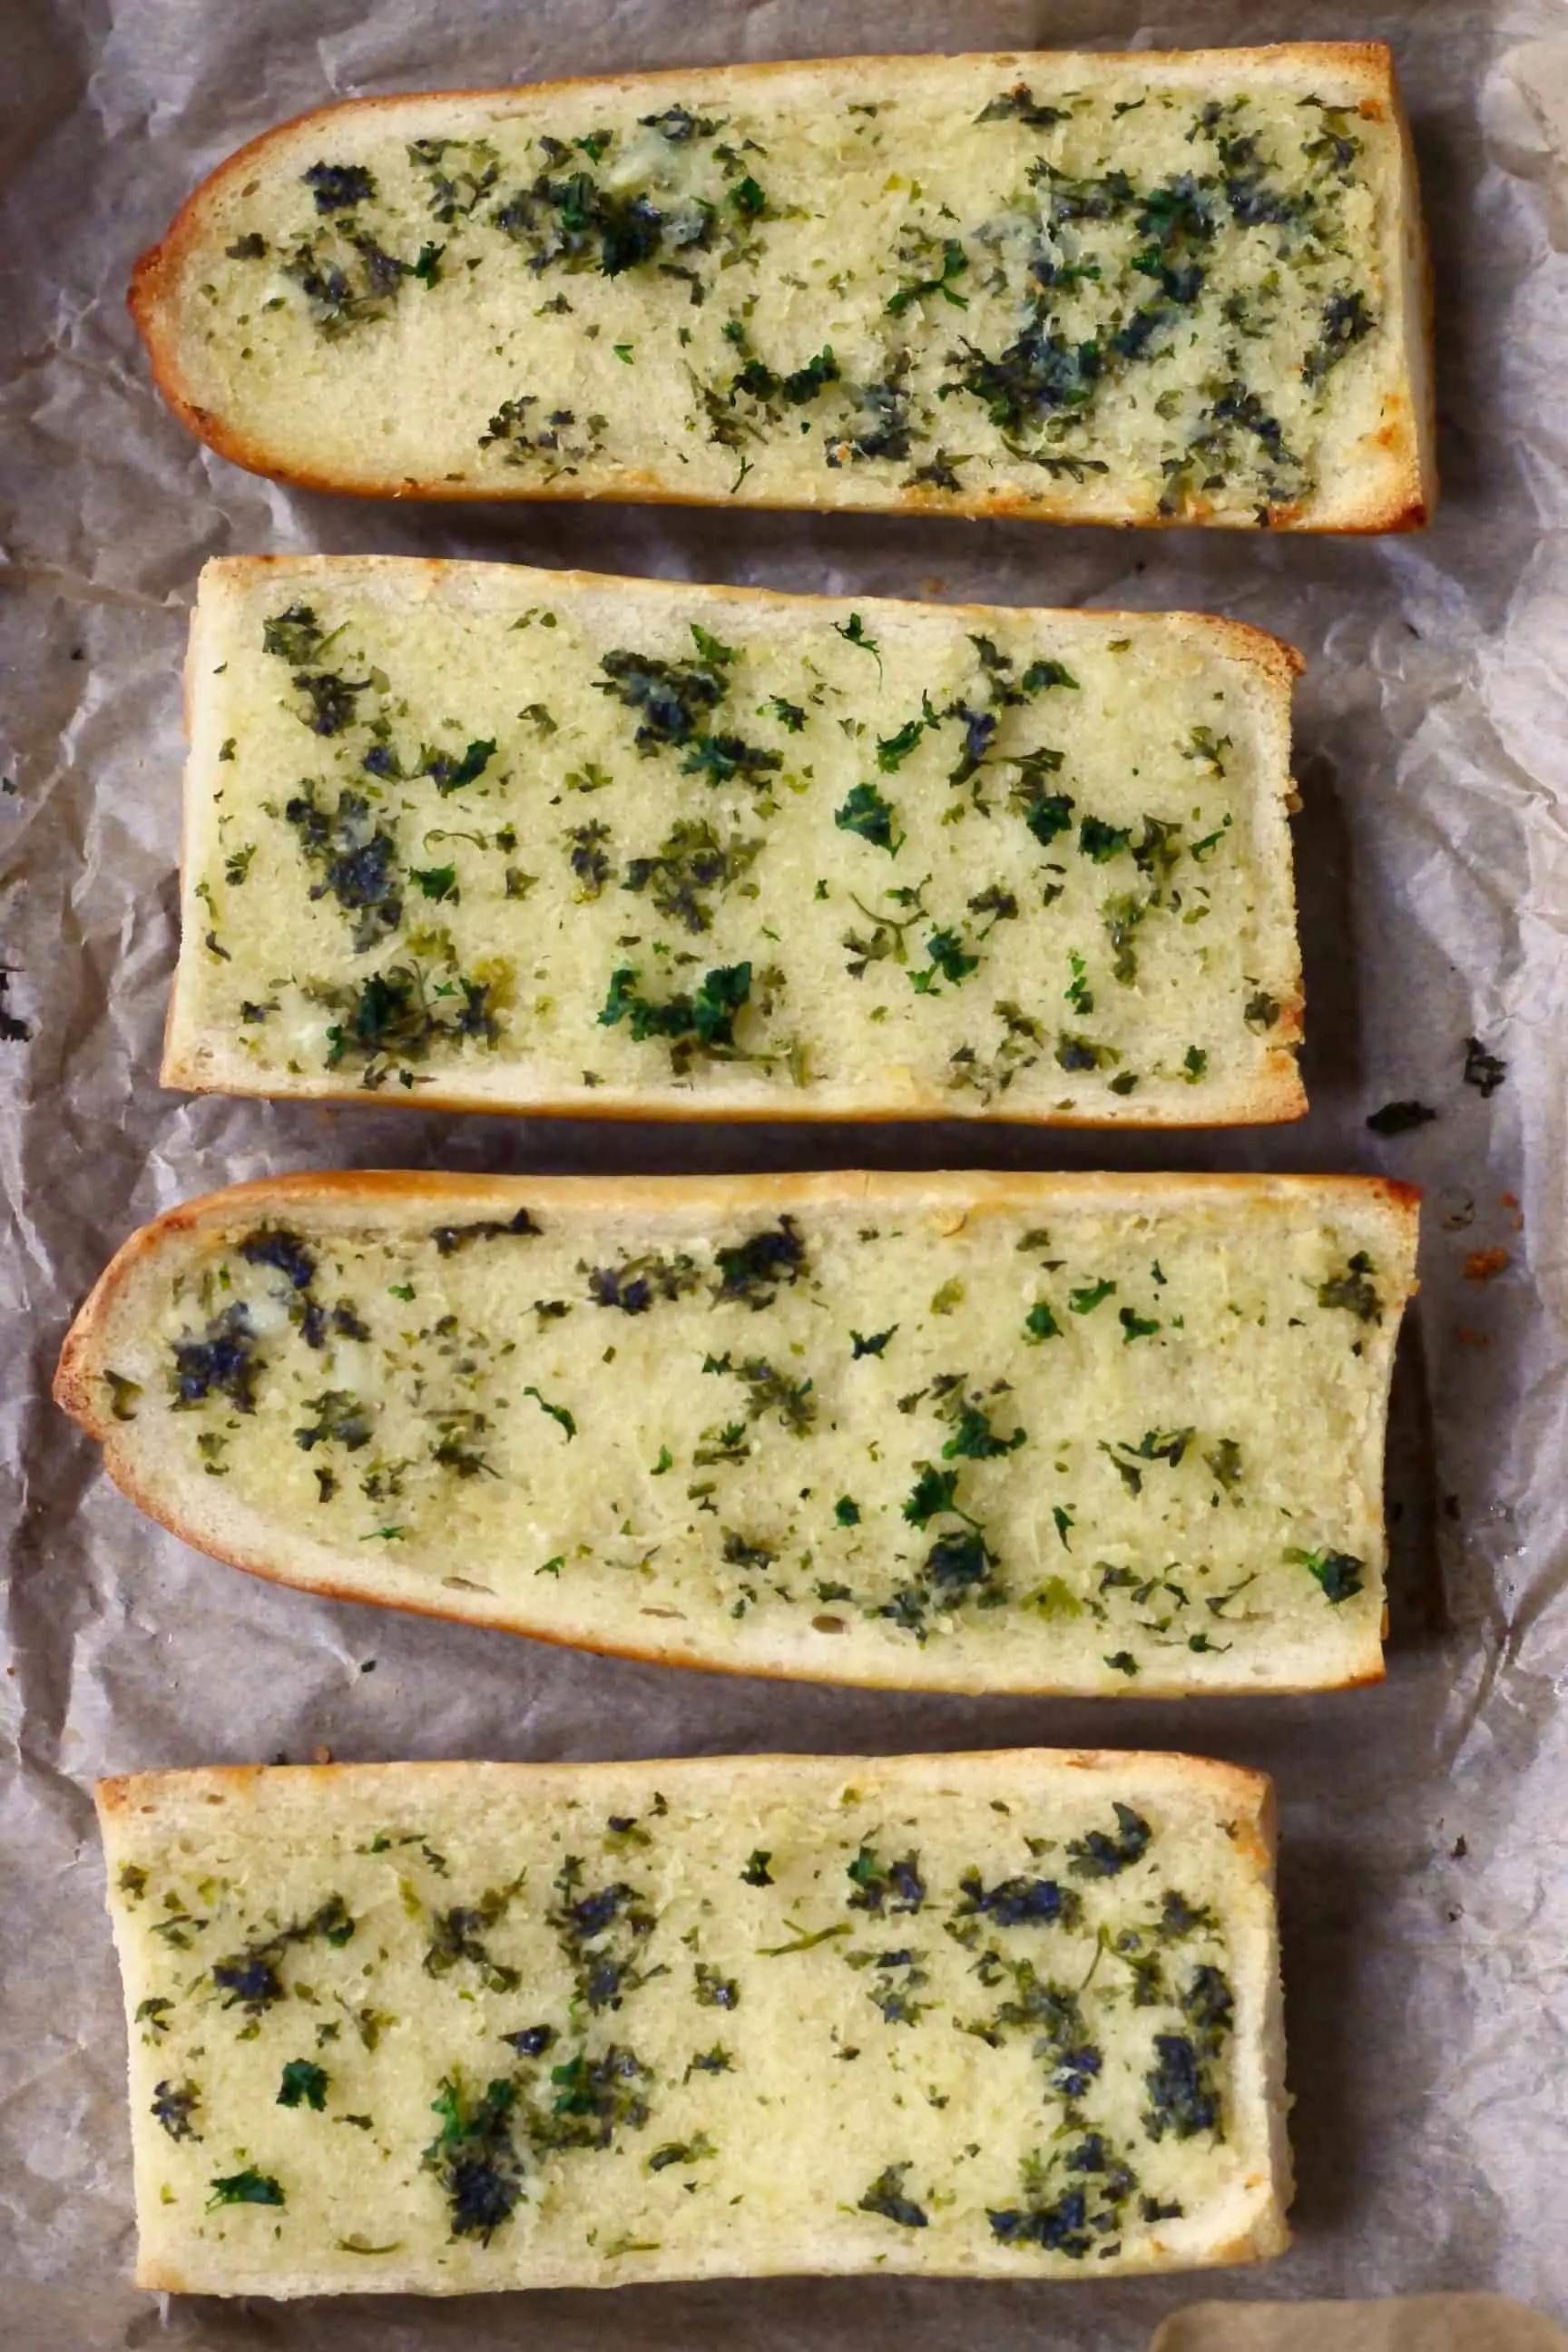 Four pieces of vegan garlic bread on a sheet of baking paper